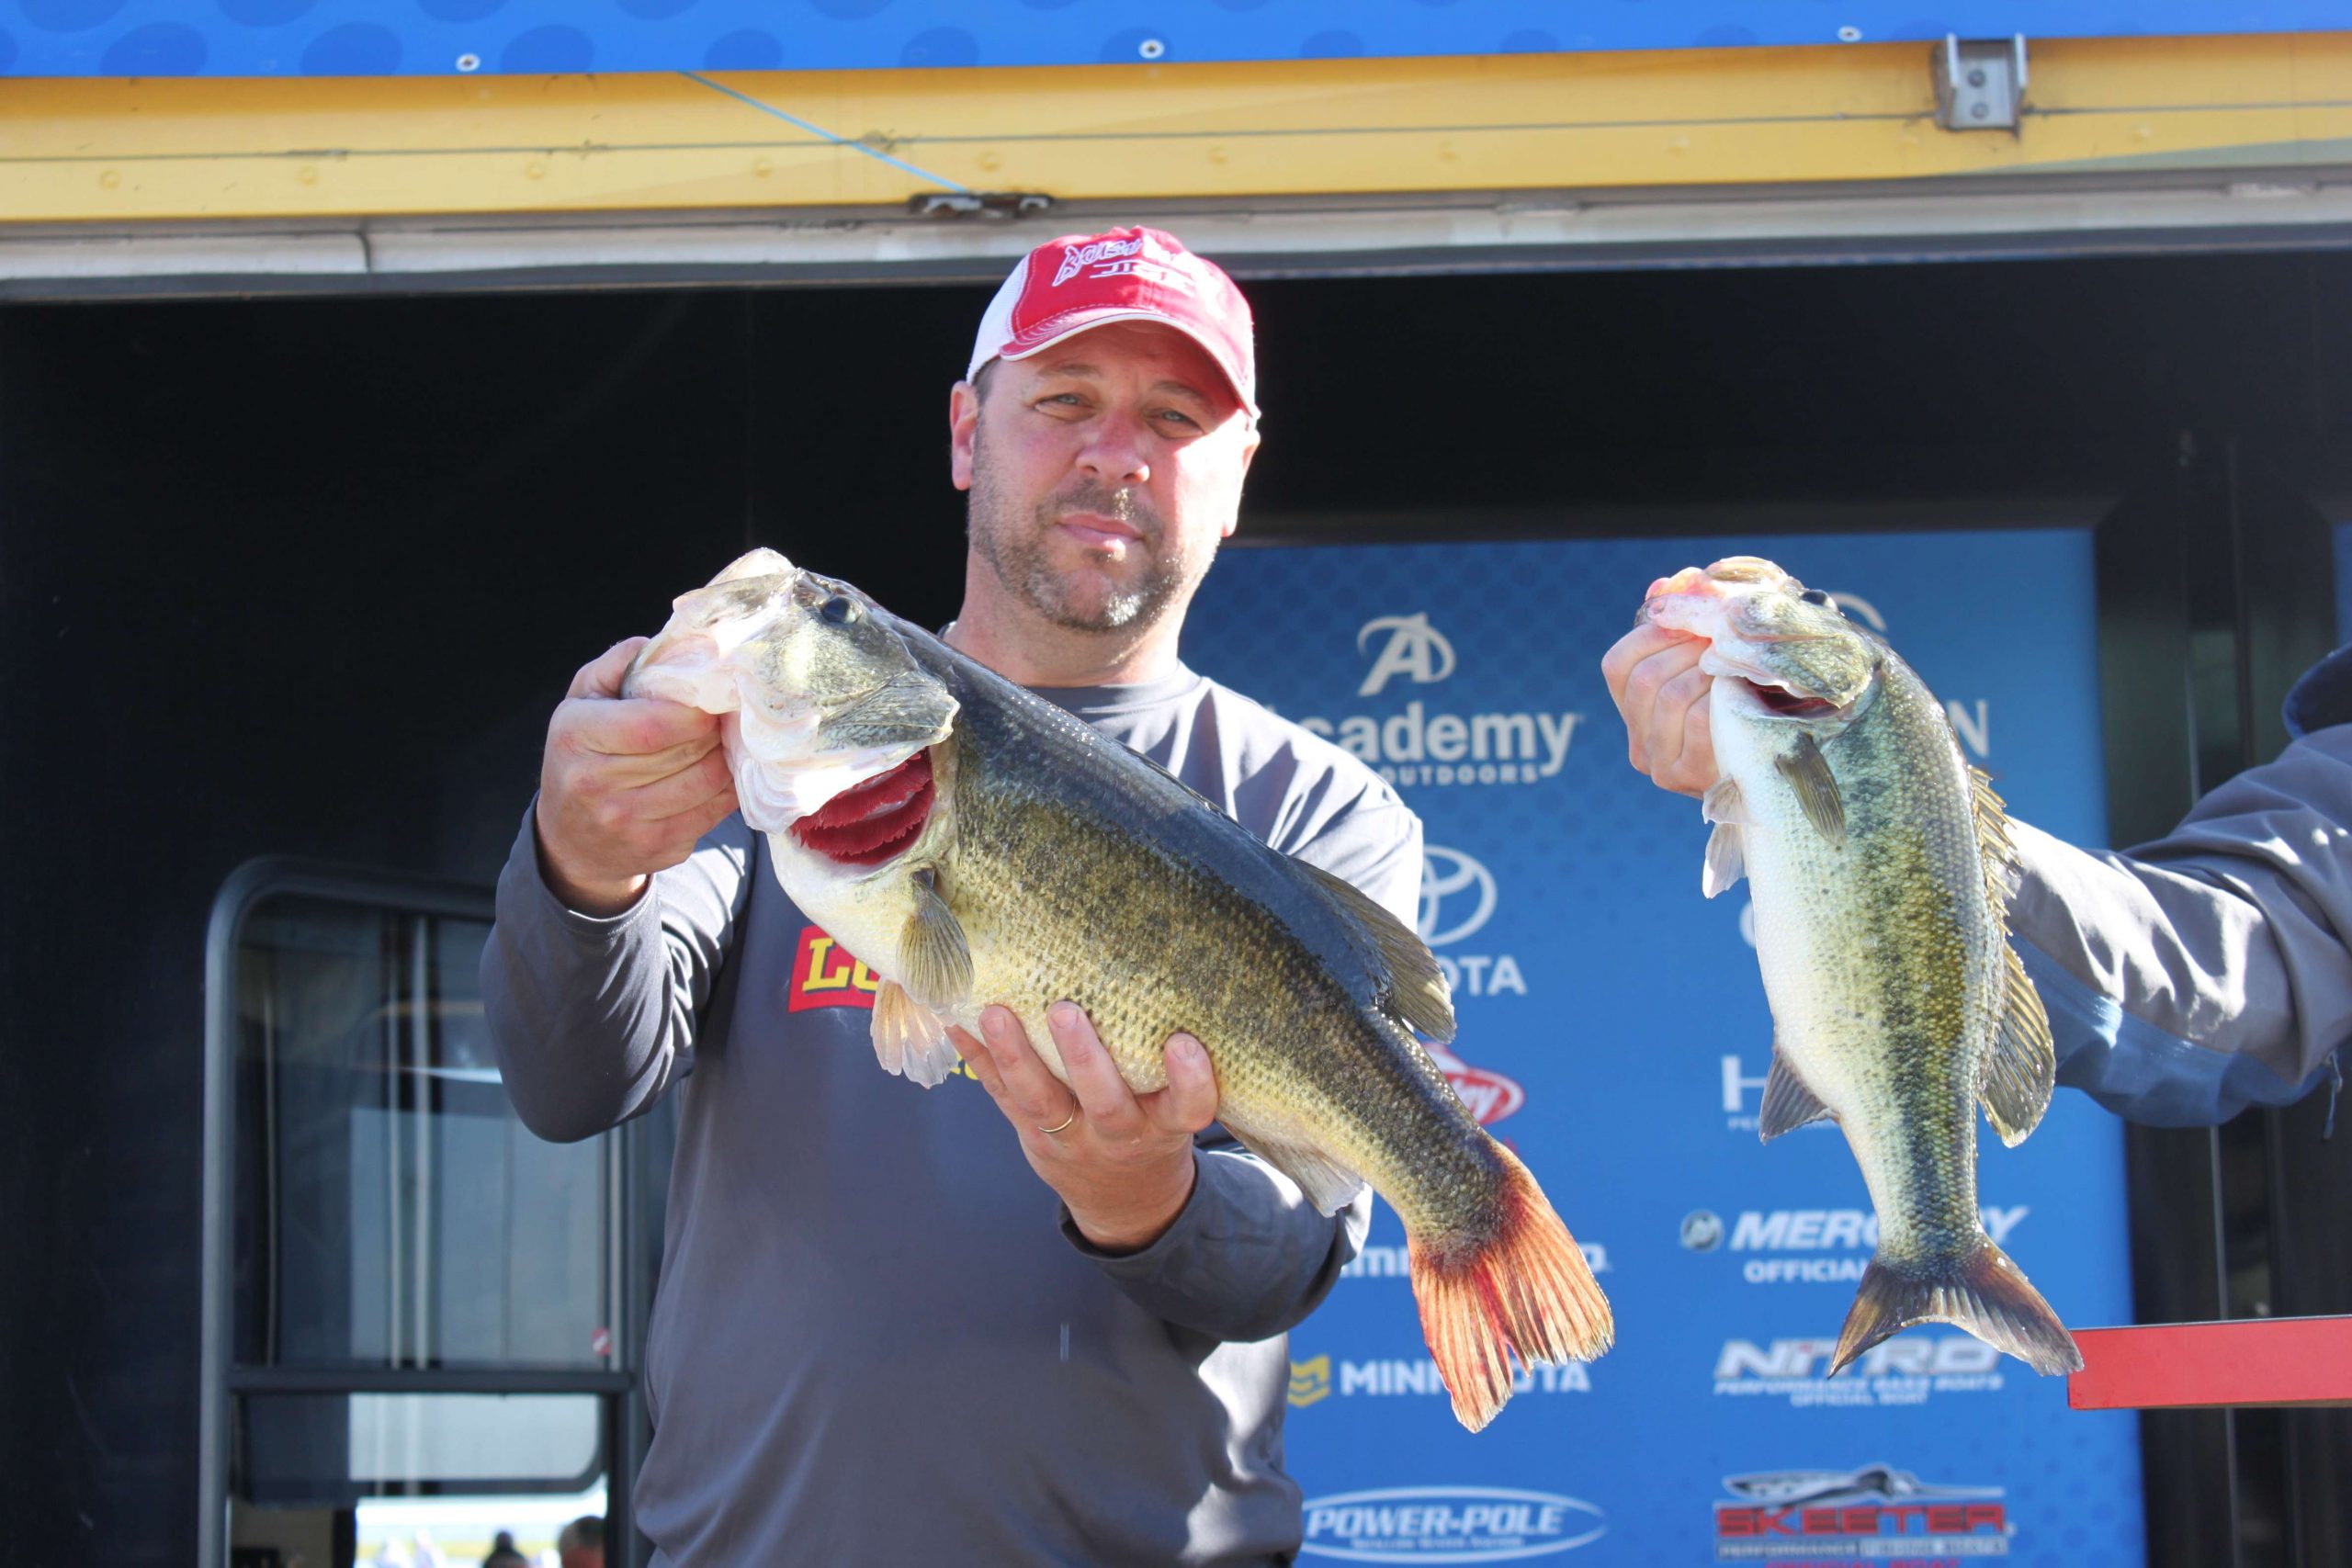 Todd Newchurch, a non-boater for Team Louisiana, is third in the division with 21-15 over two days. That's a 7-pounder he's holding, while Hank Weldon inserts another big bass into the frame.
